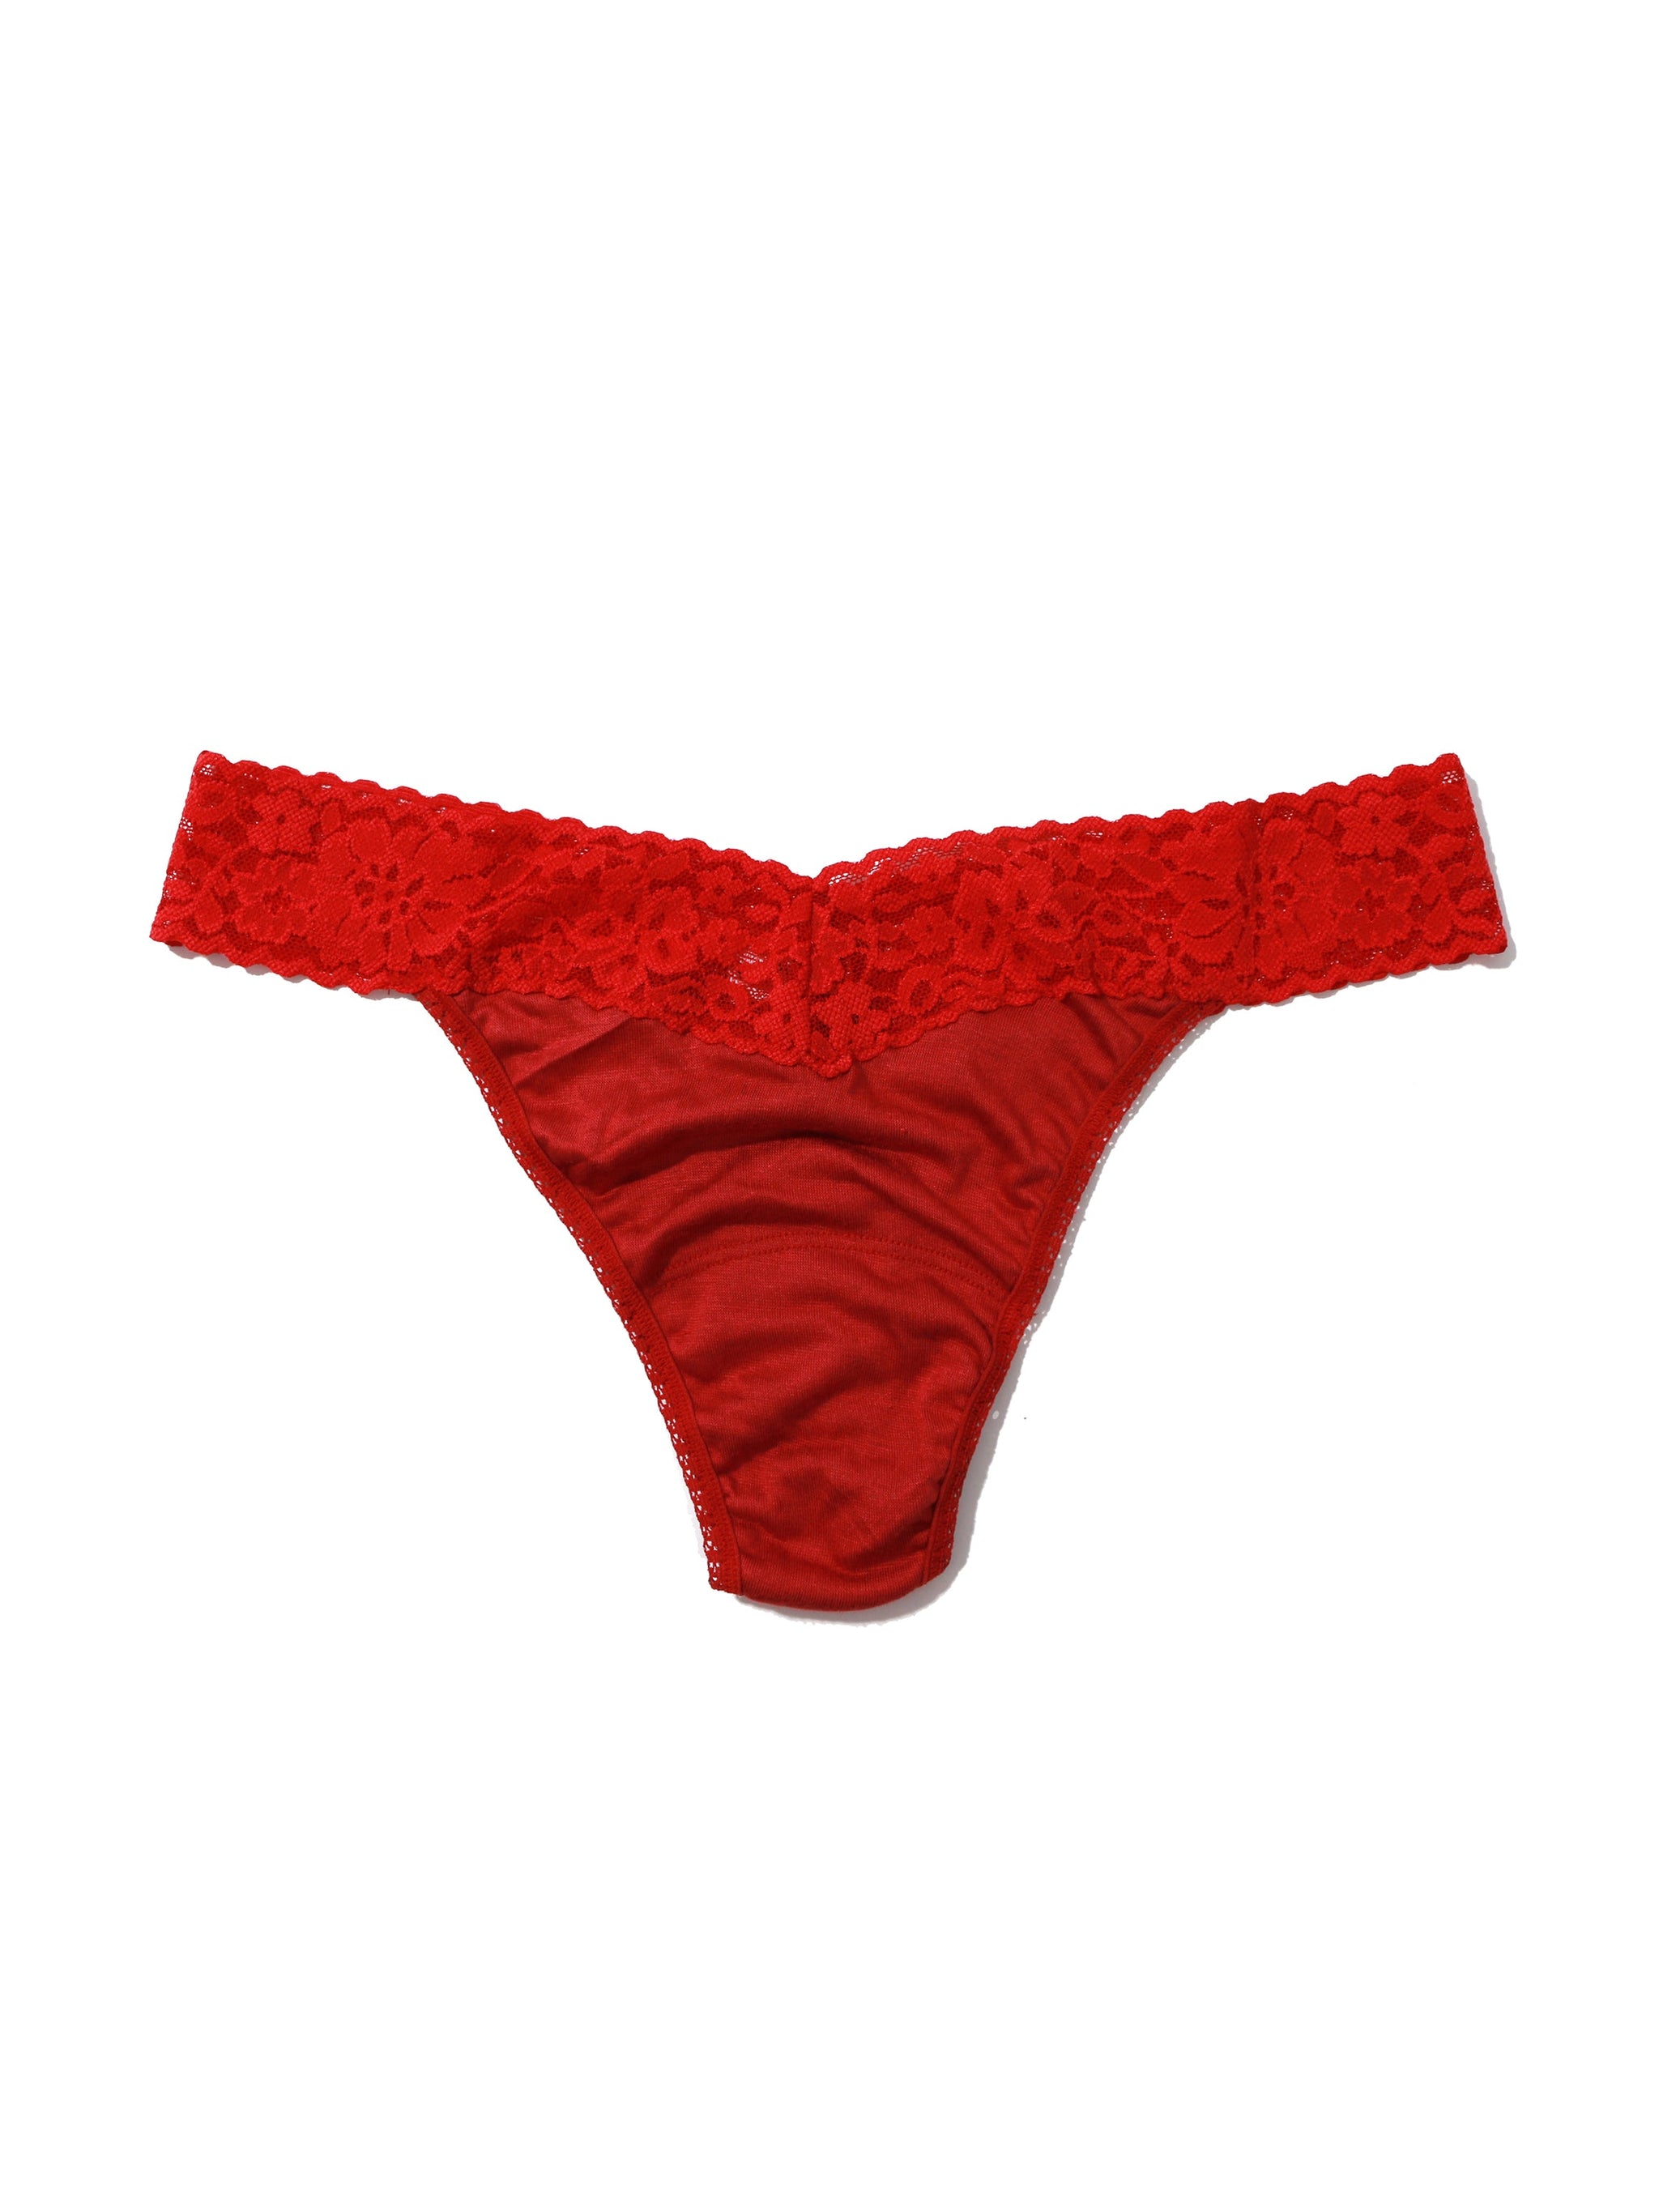 Red Thongs - Lace & Cotton